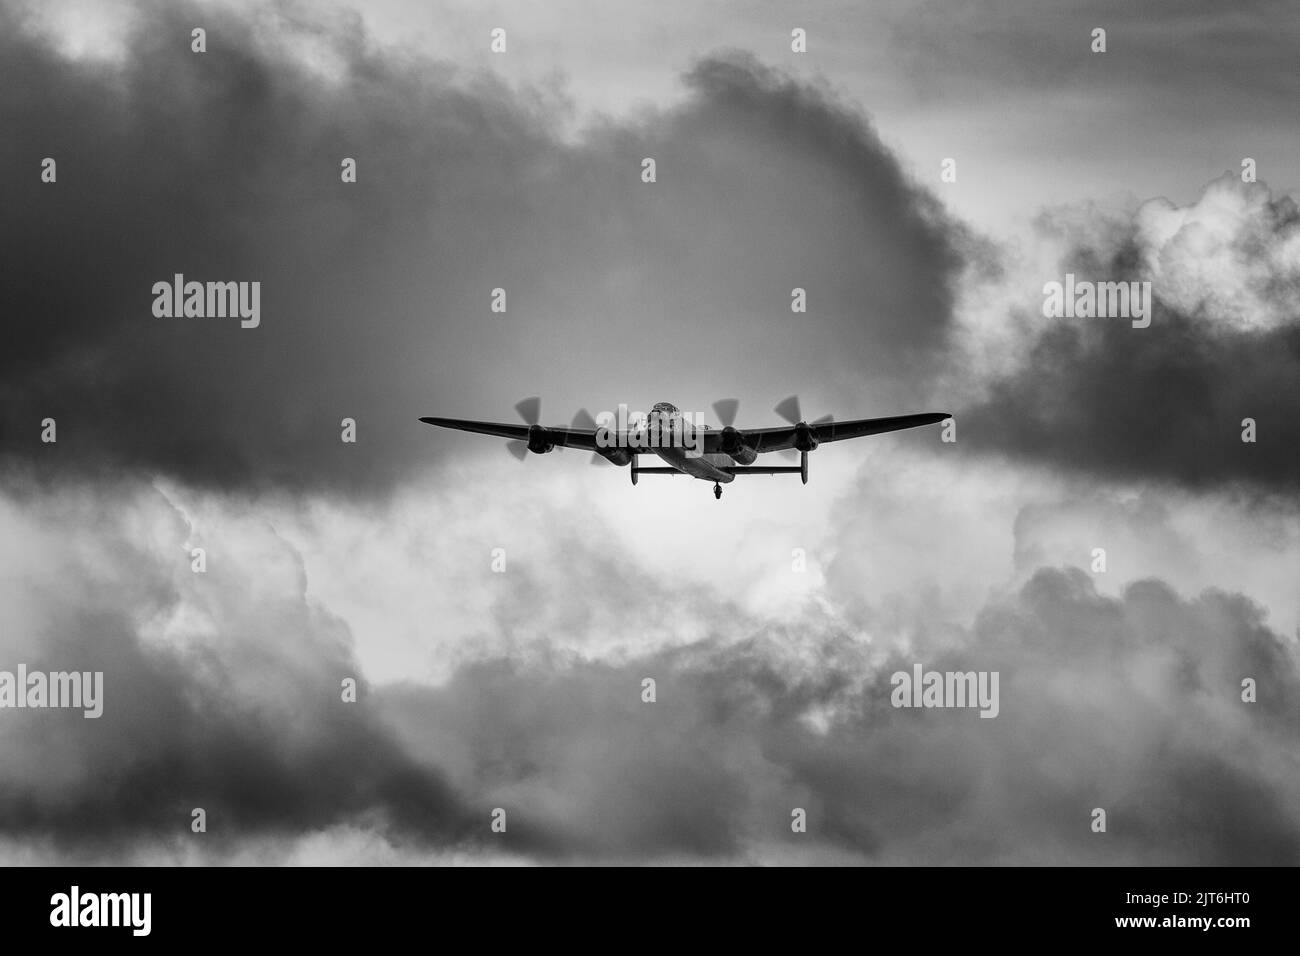 An Avro Lancaster flying in stormy skies Stock Photo